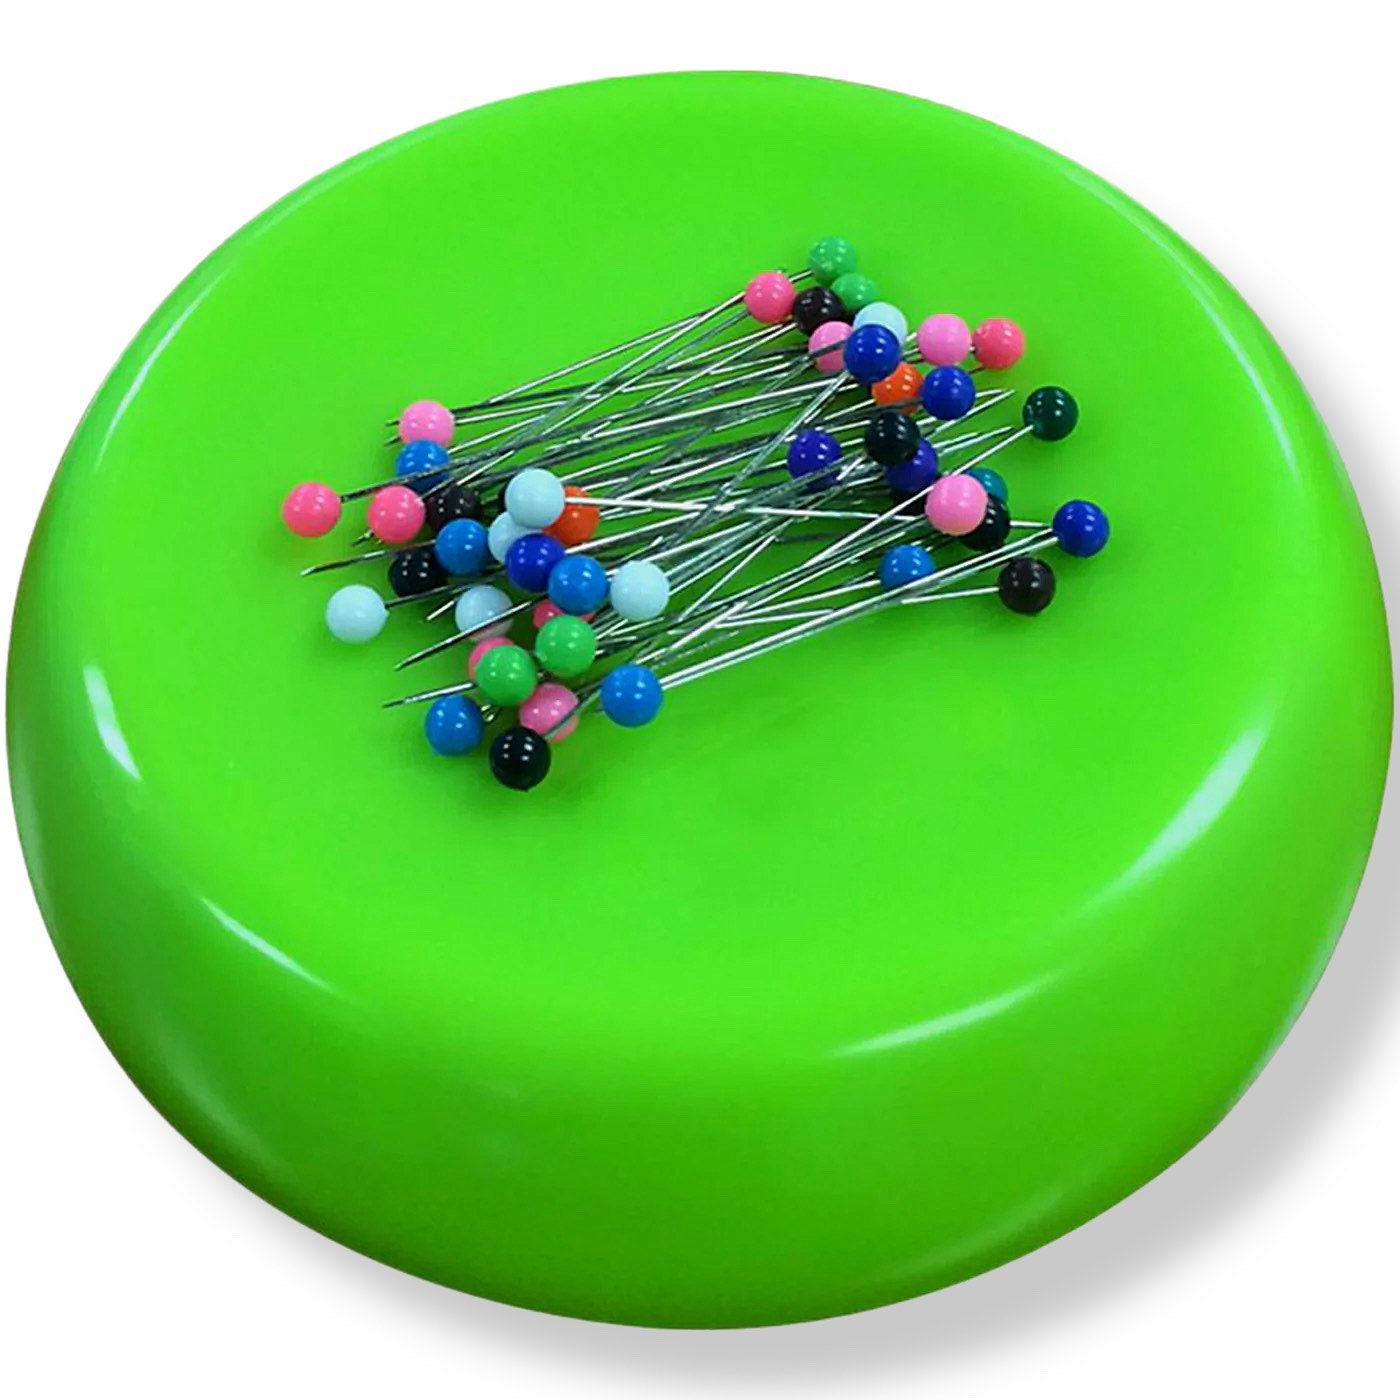 Magnetic Pin Cushion by IDS